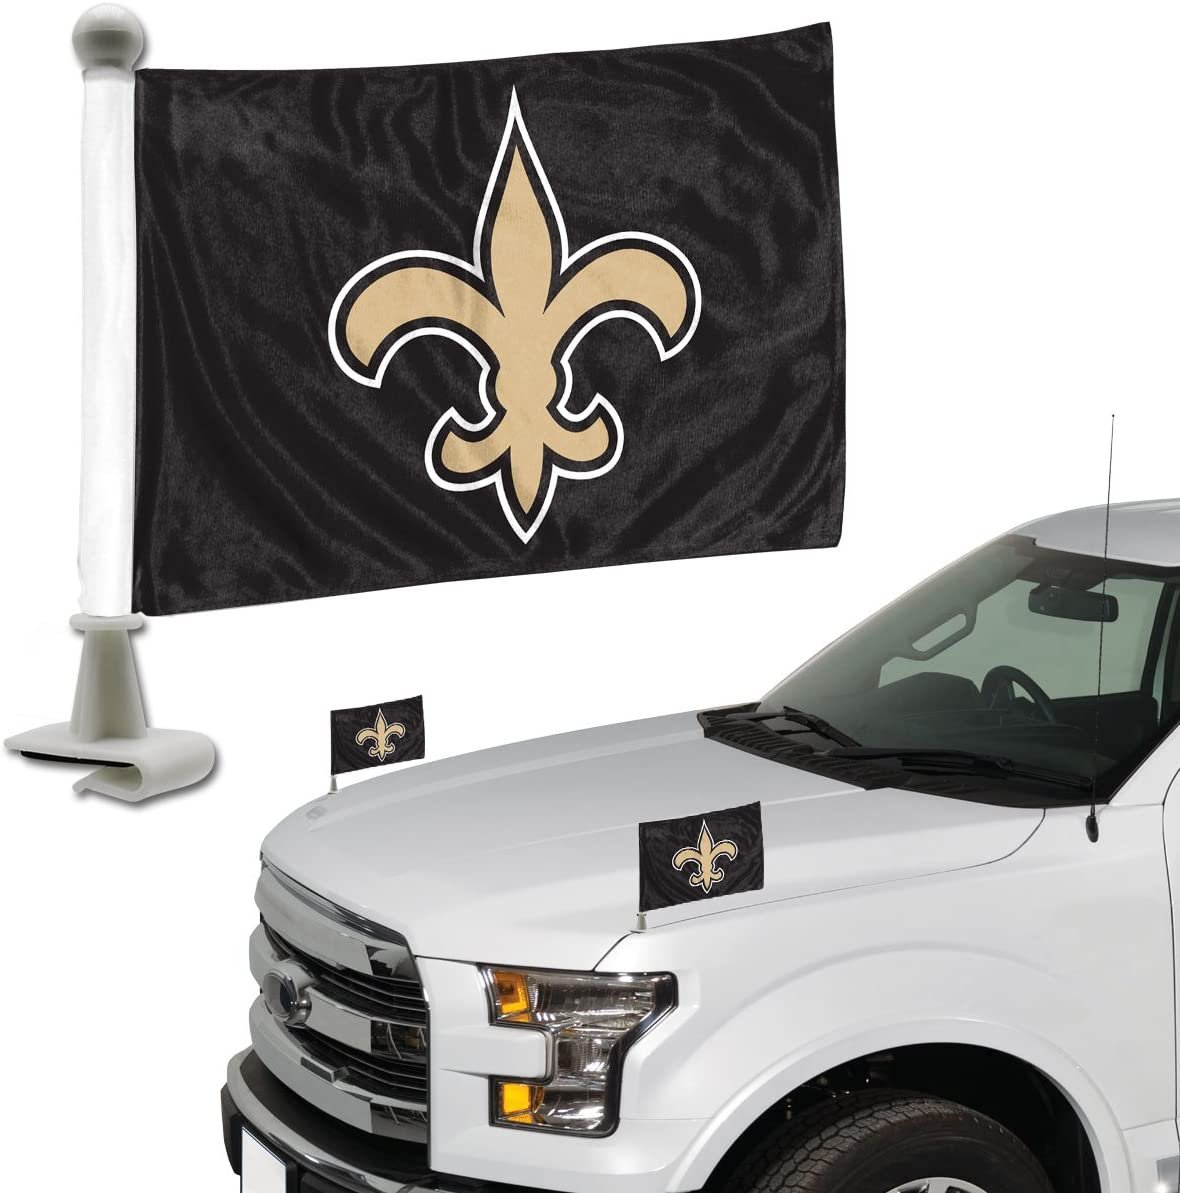 FANMATS 61874 New Orleans Saints Ambassador Car Flags - 2 Pack Mini Auto Flags, 4in X 6in, Perfect for Hood or Trunk